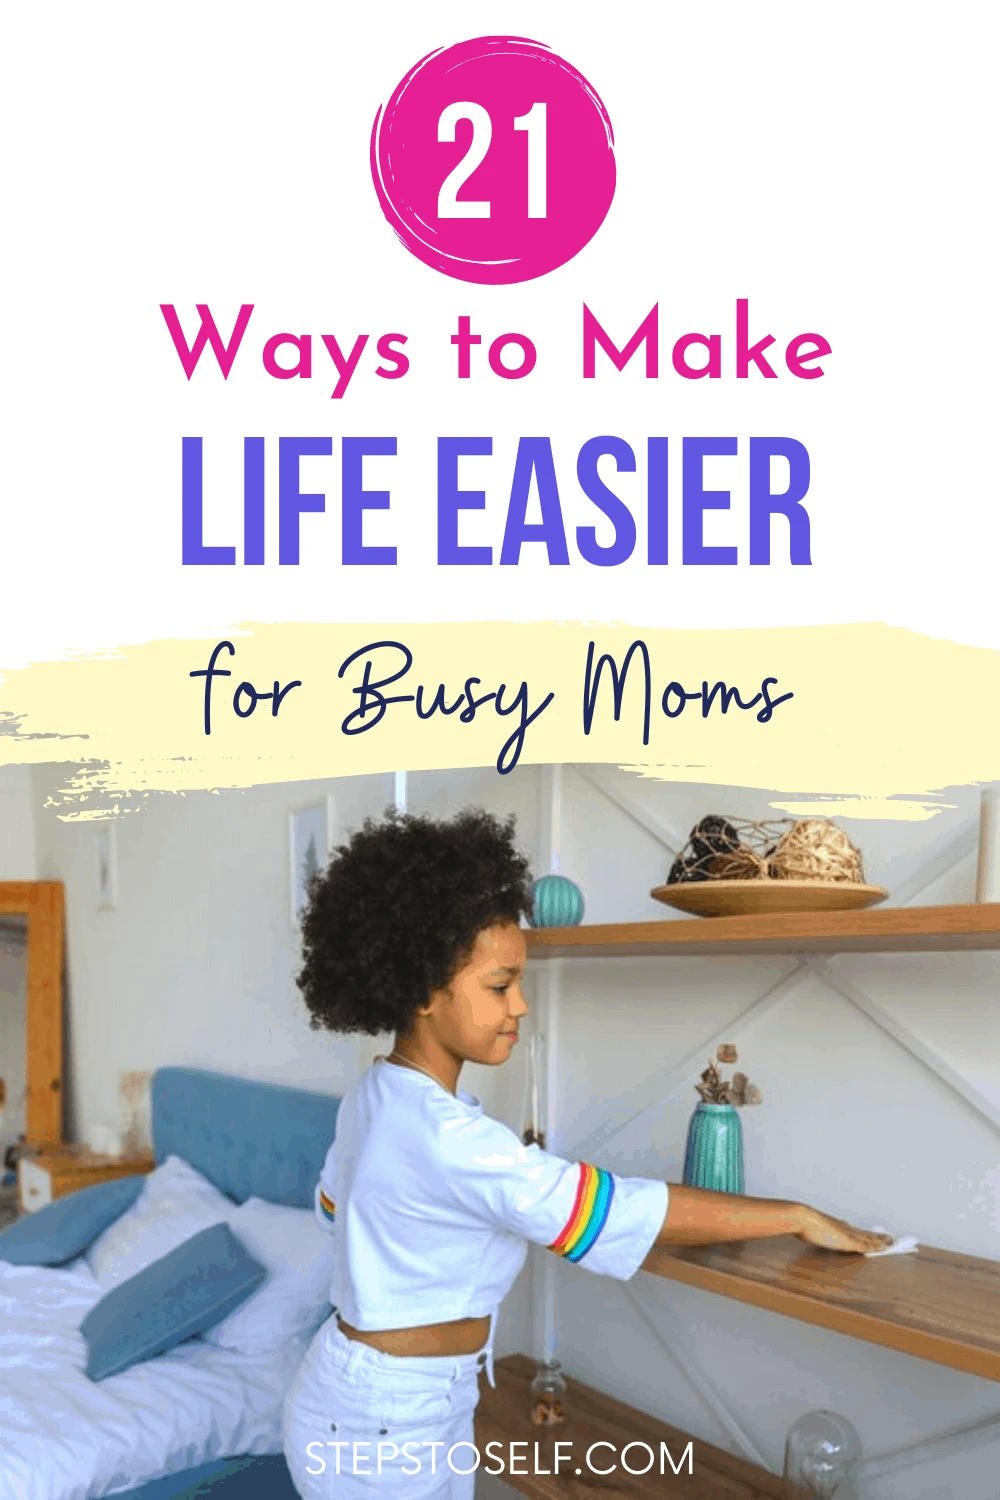 21 Smart Ways to Make Life Easier for Busy Moms